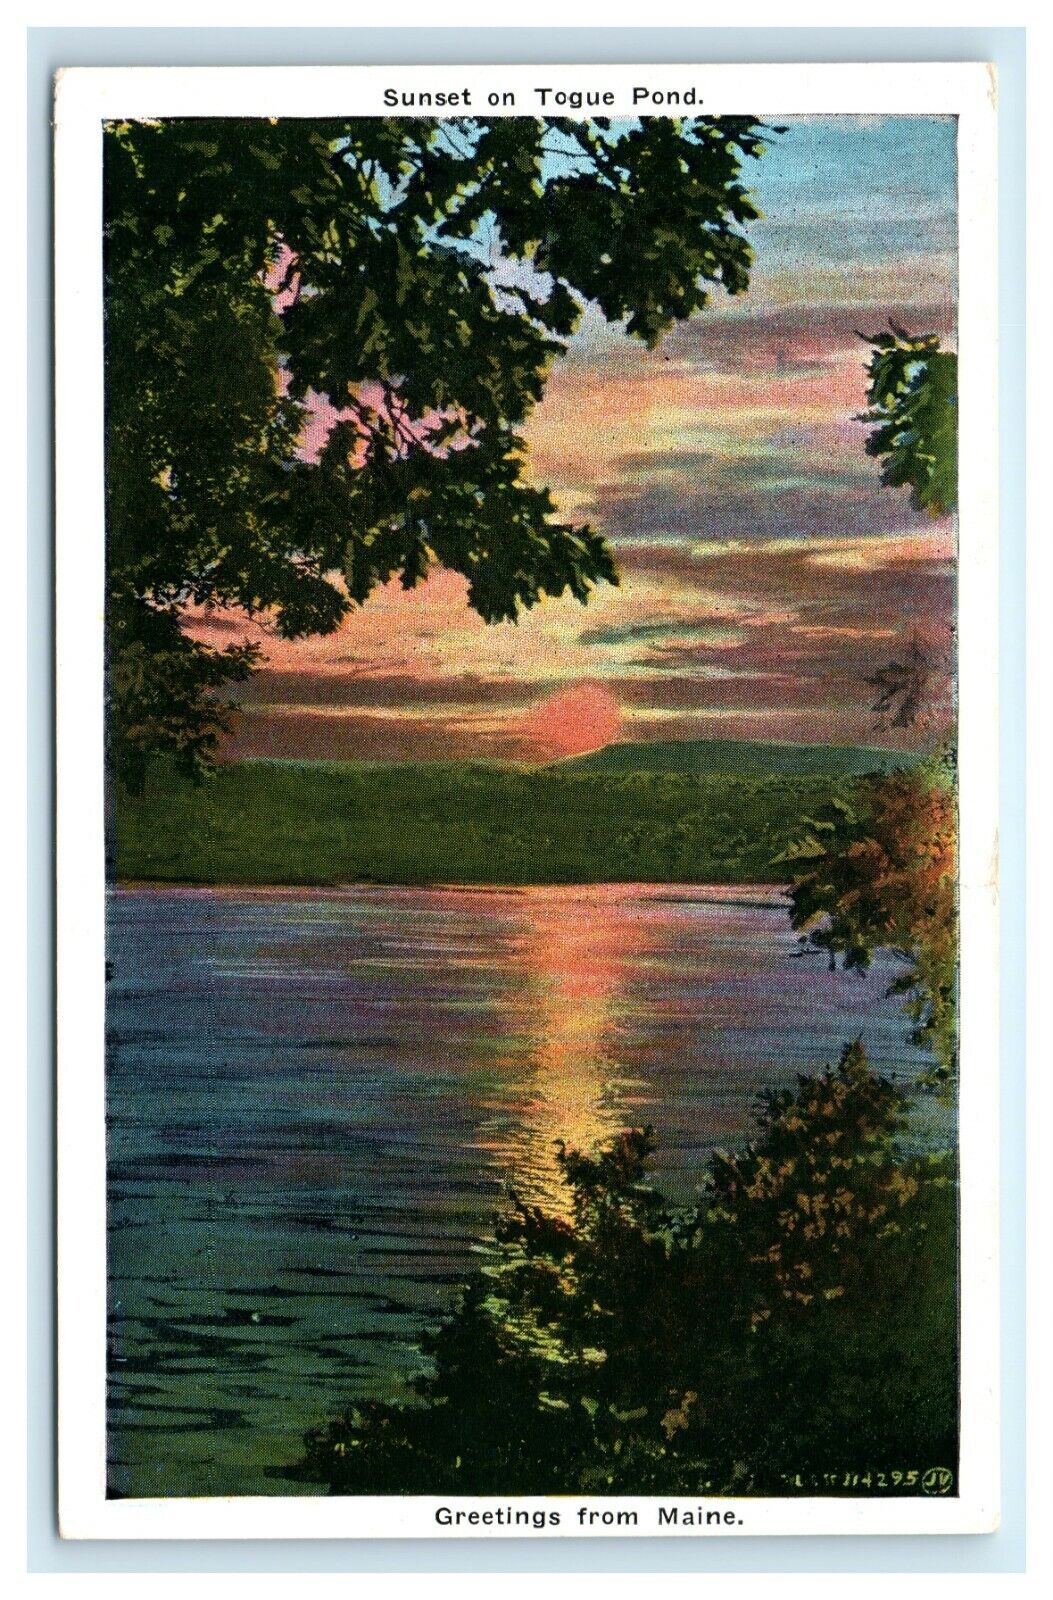 POSTCARD Greetings From Maine Evening on Togue Pond Colored Sky Sunset